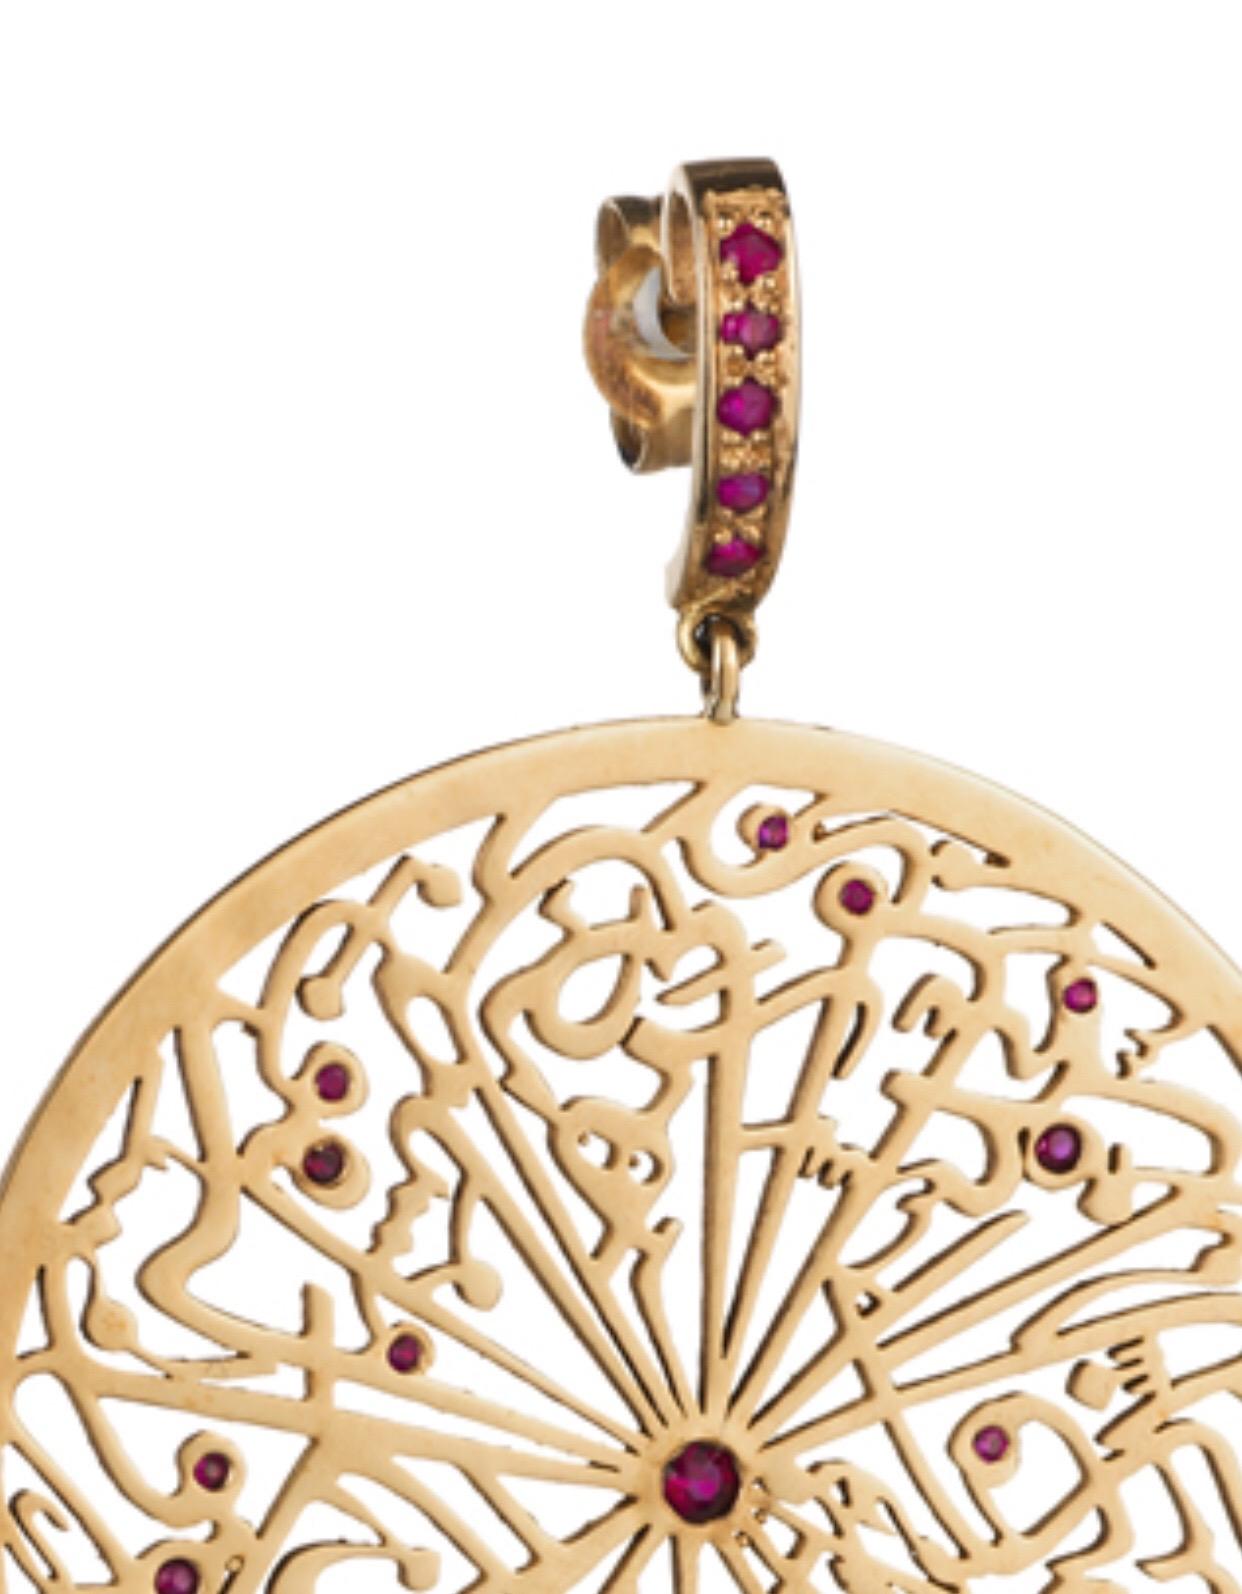 From the Parisa London Collection, these artistically stylised handmade filigree earrings are made with heavy 18 karat gold, set with round cut rubies. A matching pendant, ring and bracelet is available under separate listing.

Ruby Colour: Red
Cut: